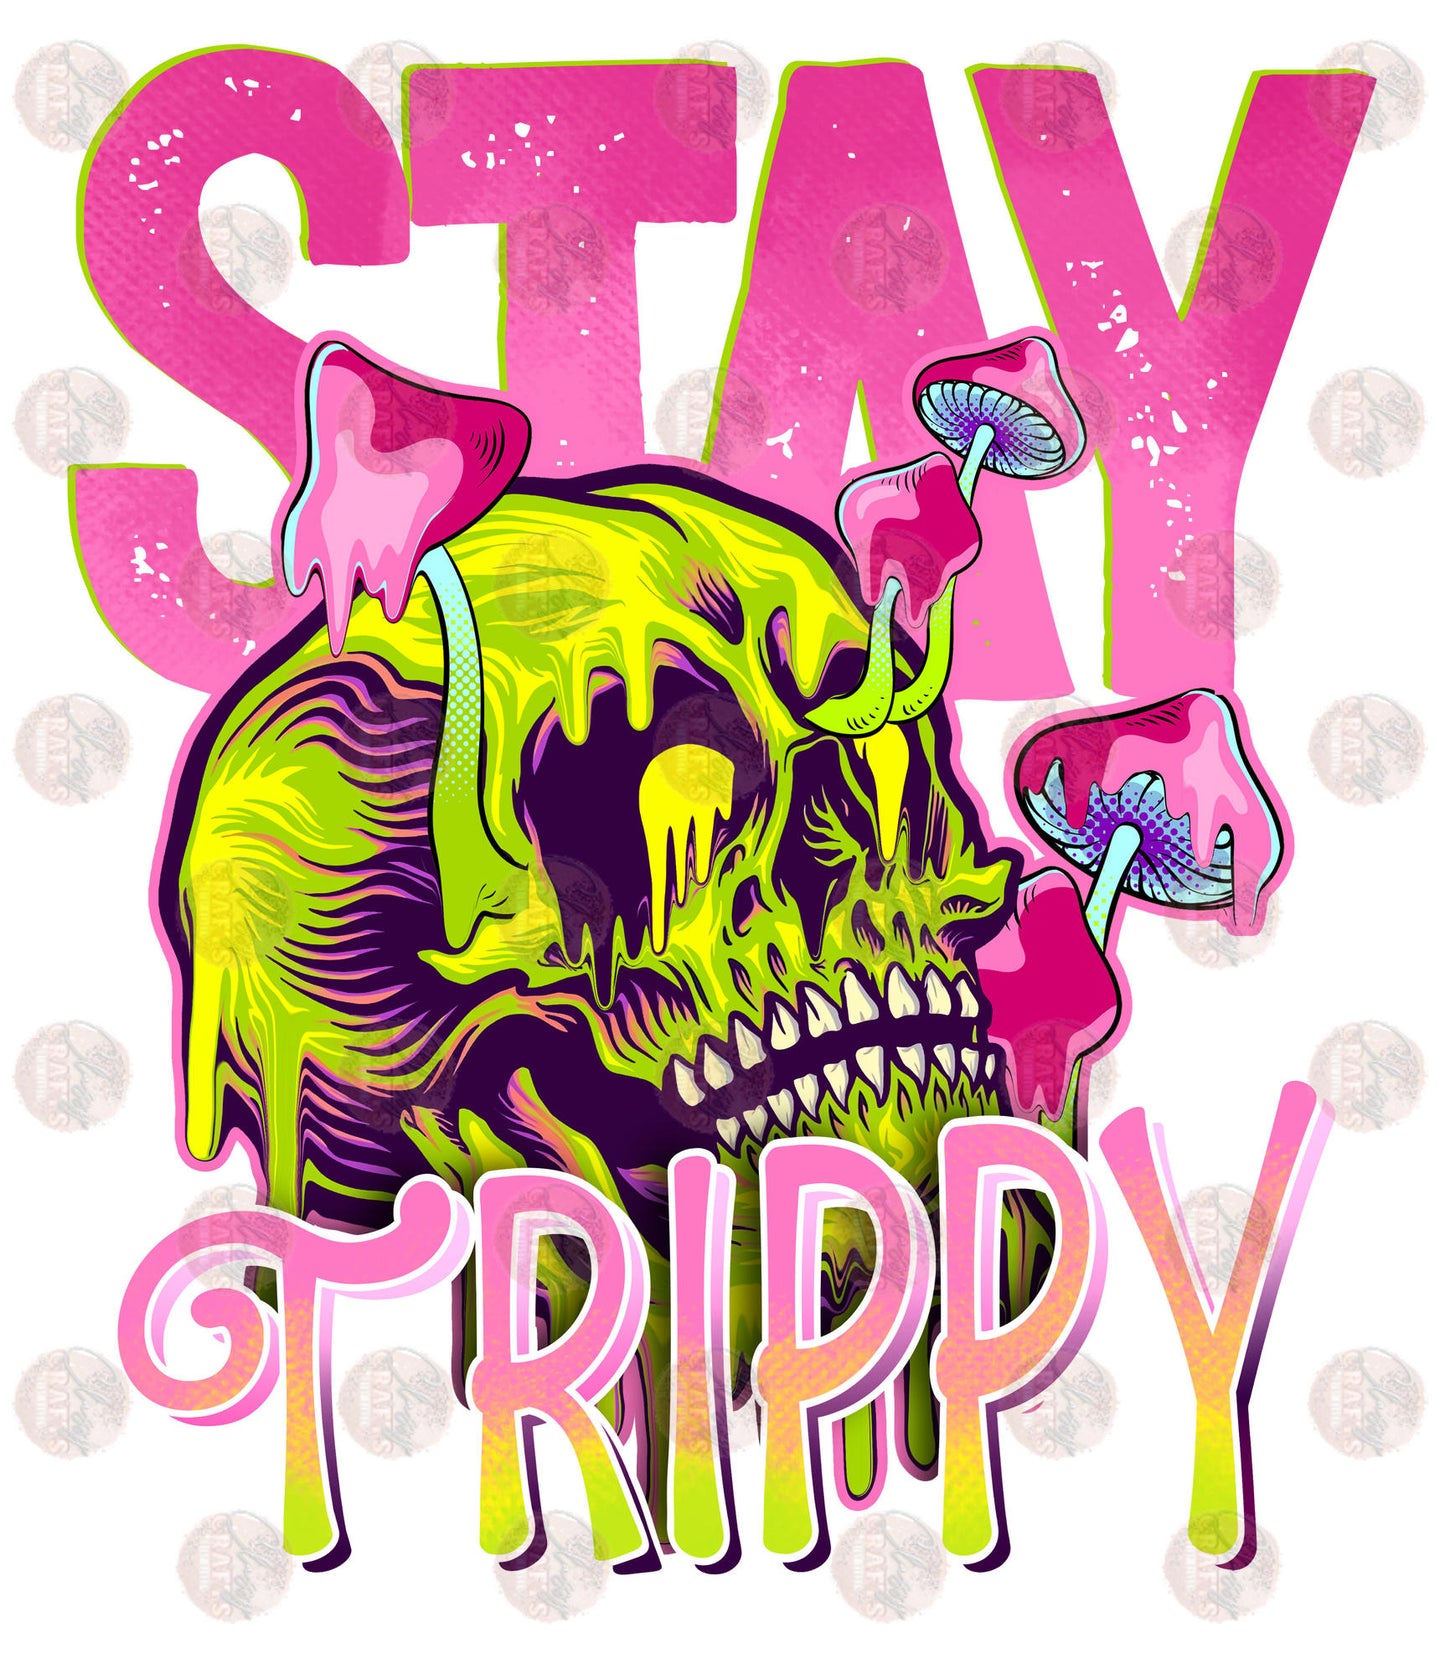 Stay Trippy - Sublimation Transfer